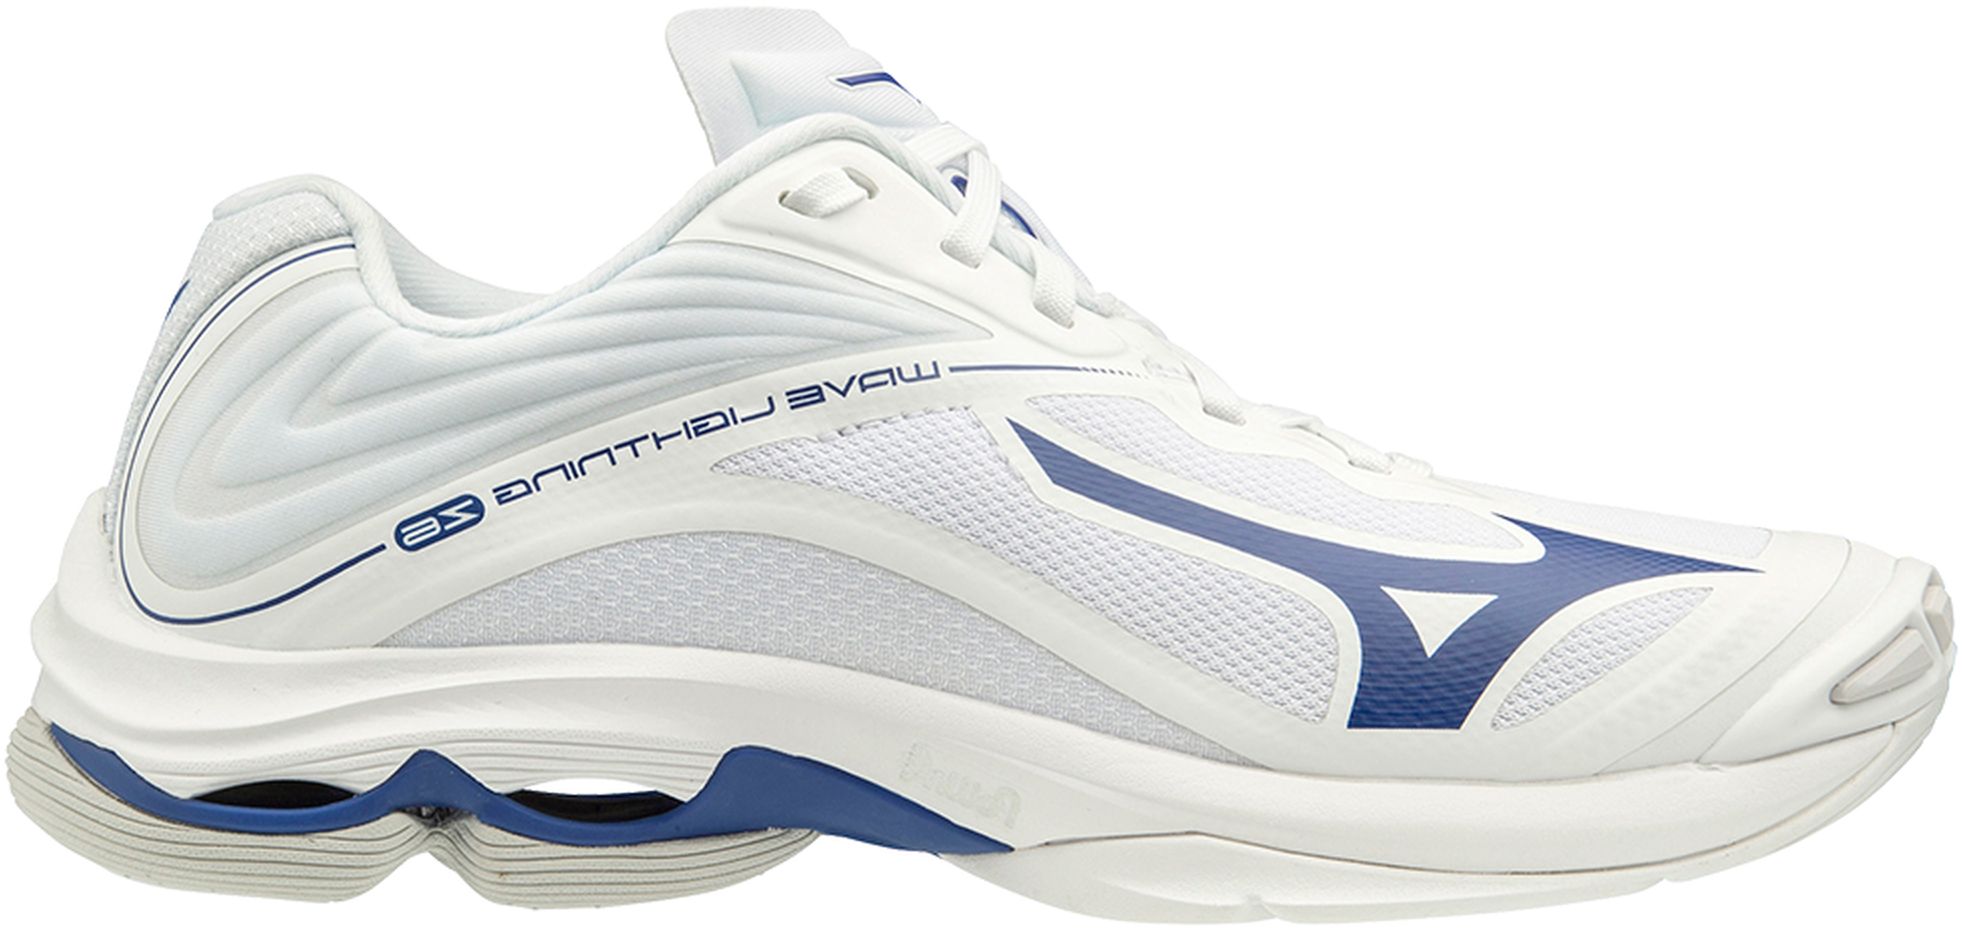 mizuno shoes for volleyball women's